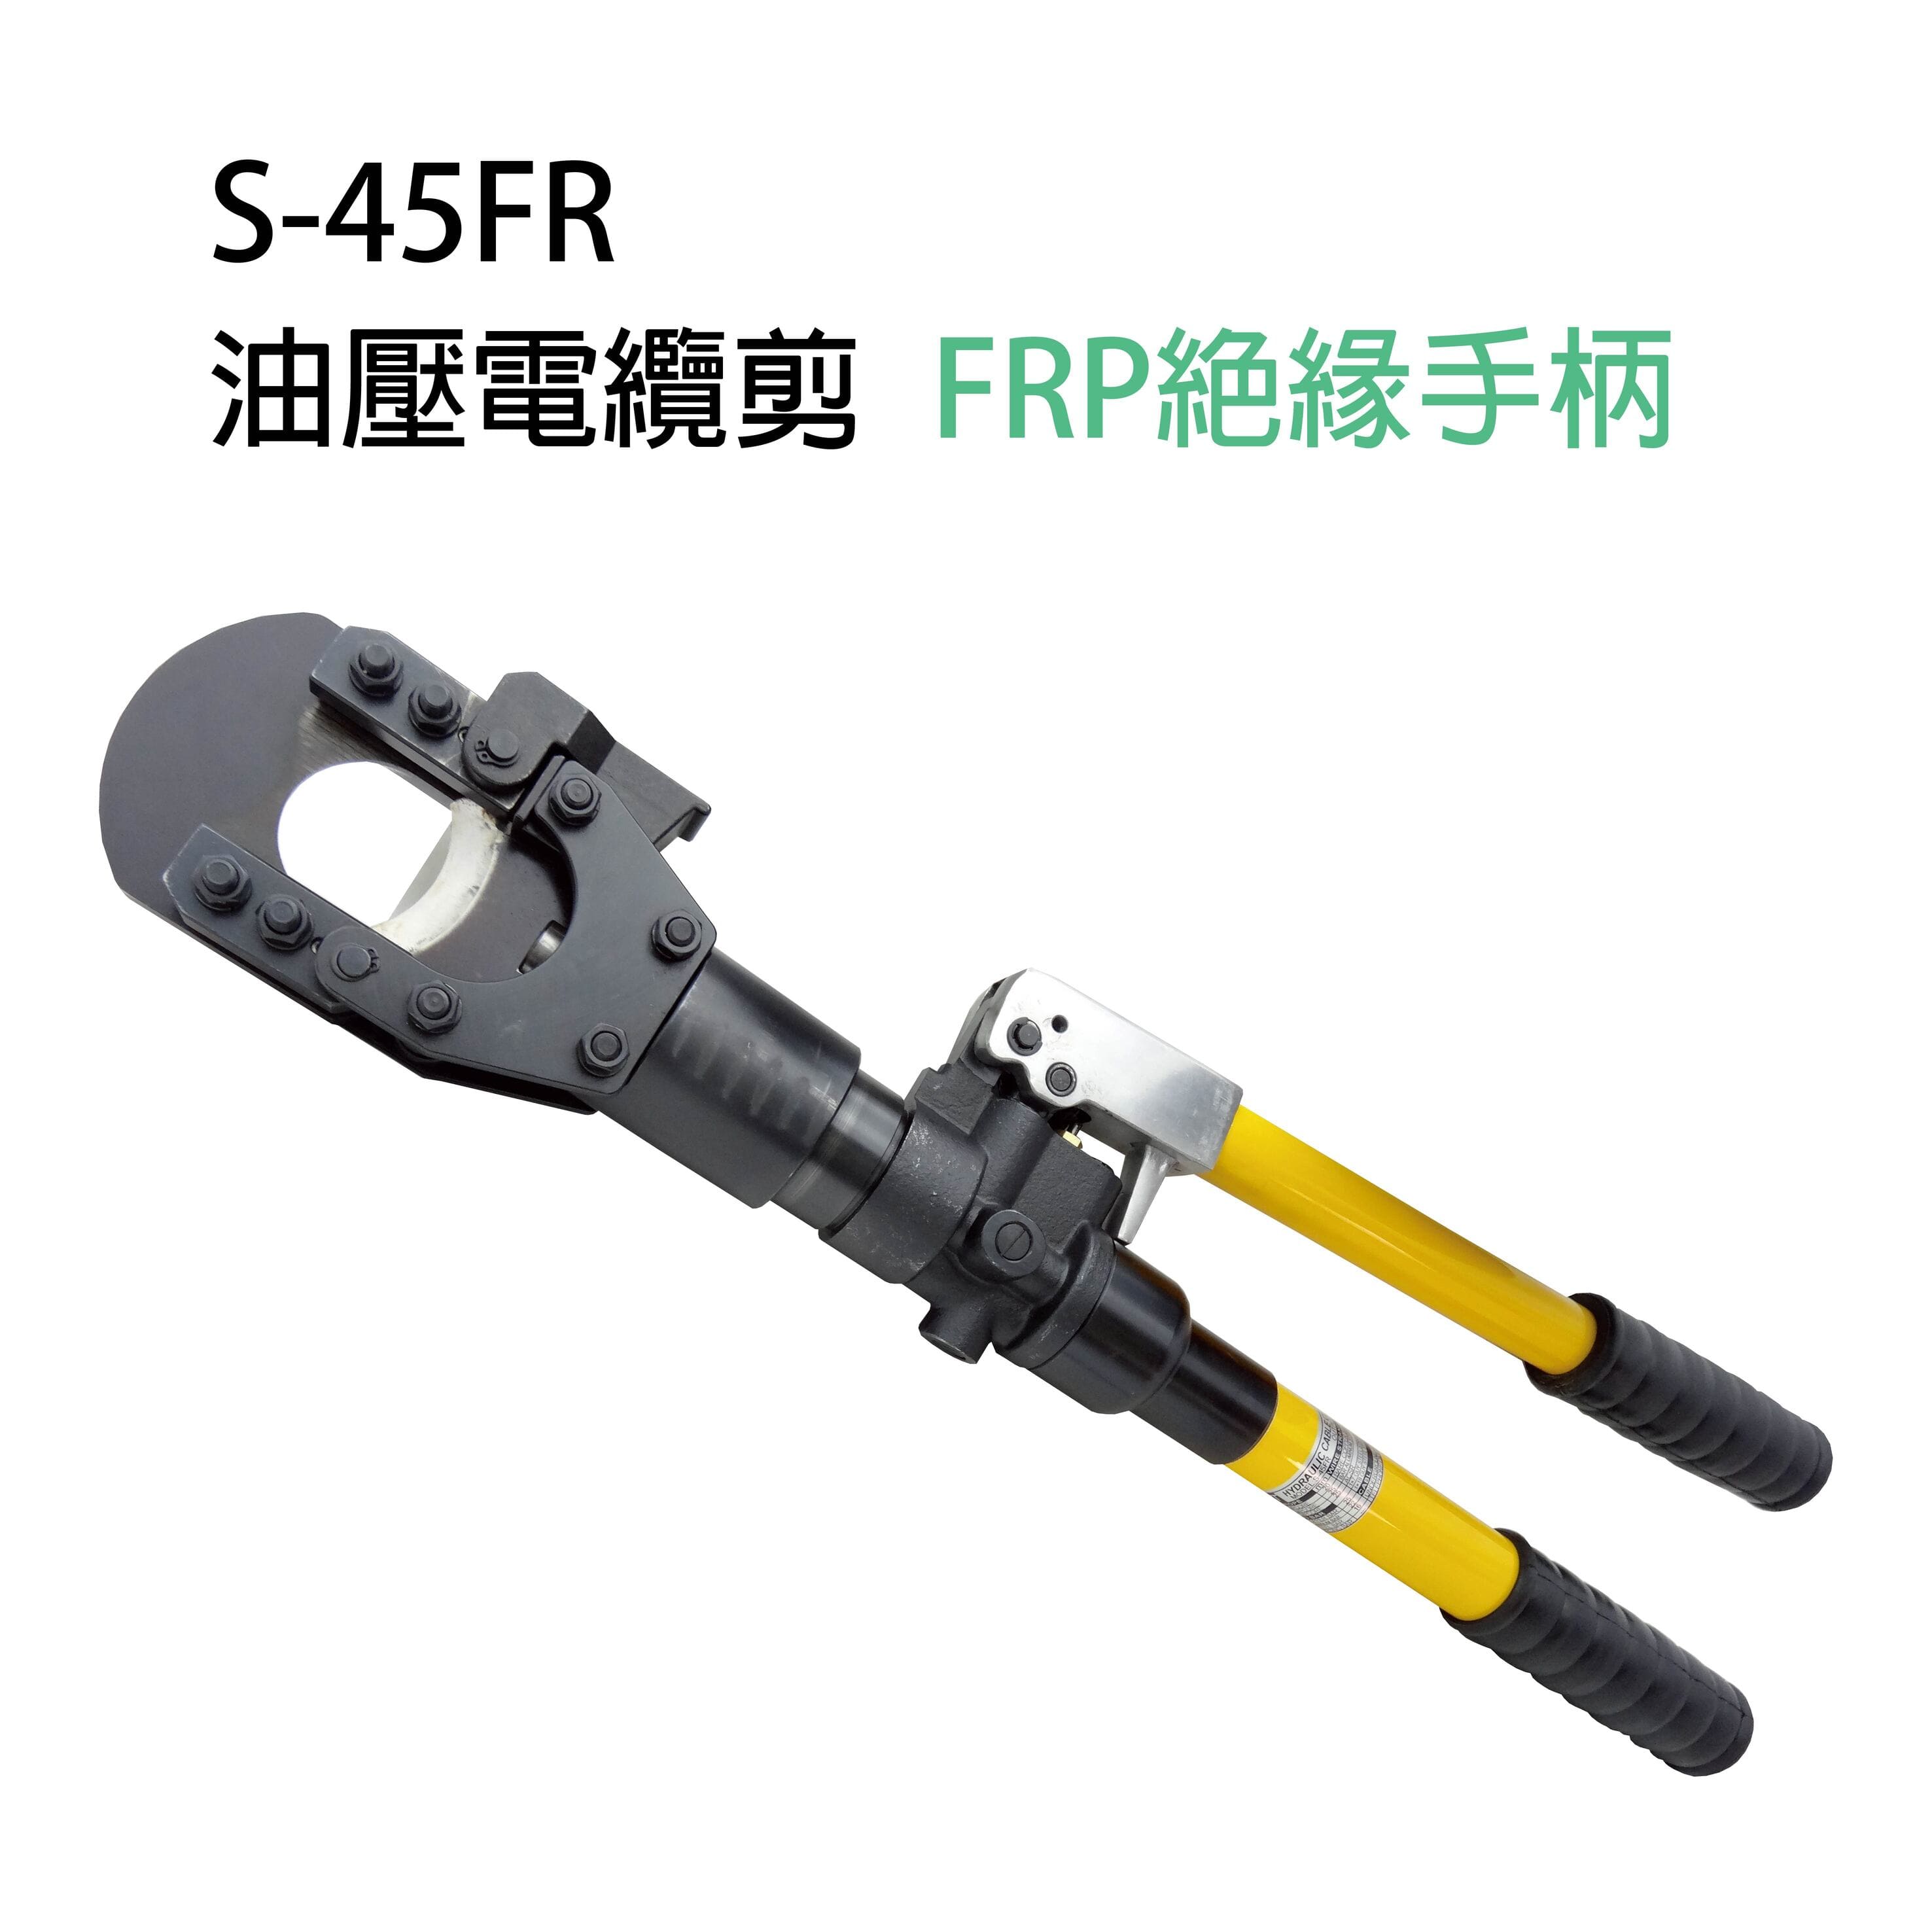 S-45FR MANUAL HYDRAULIC CABLE CUTTERS